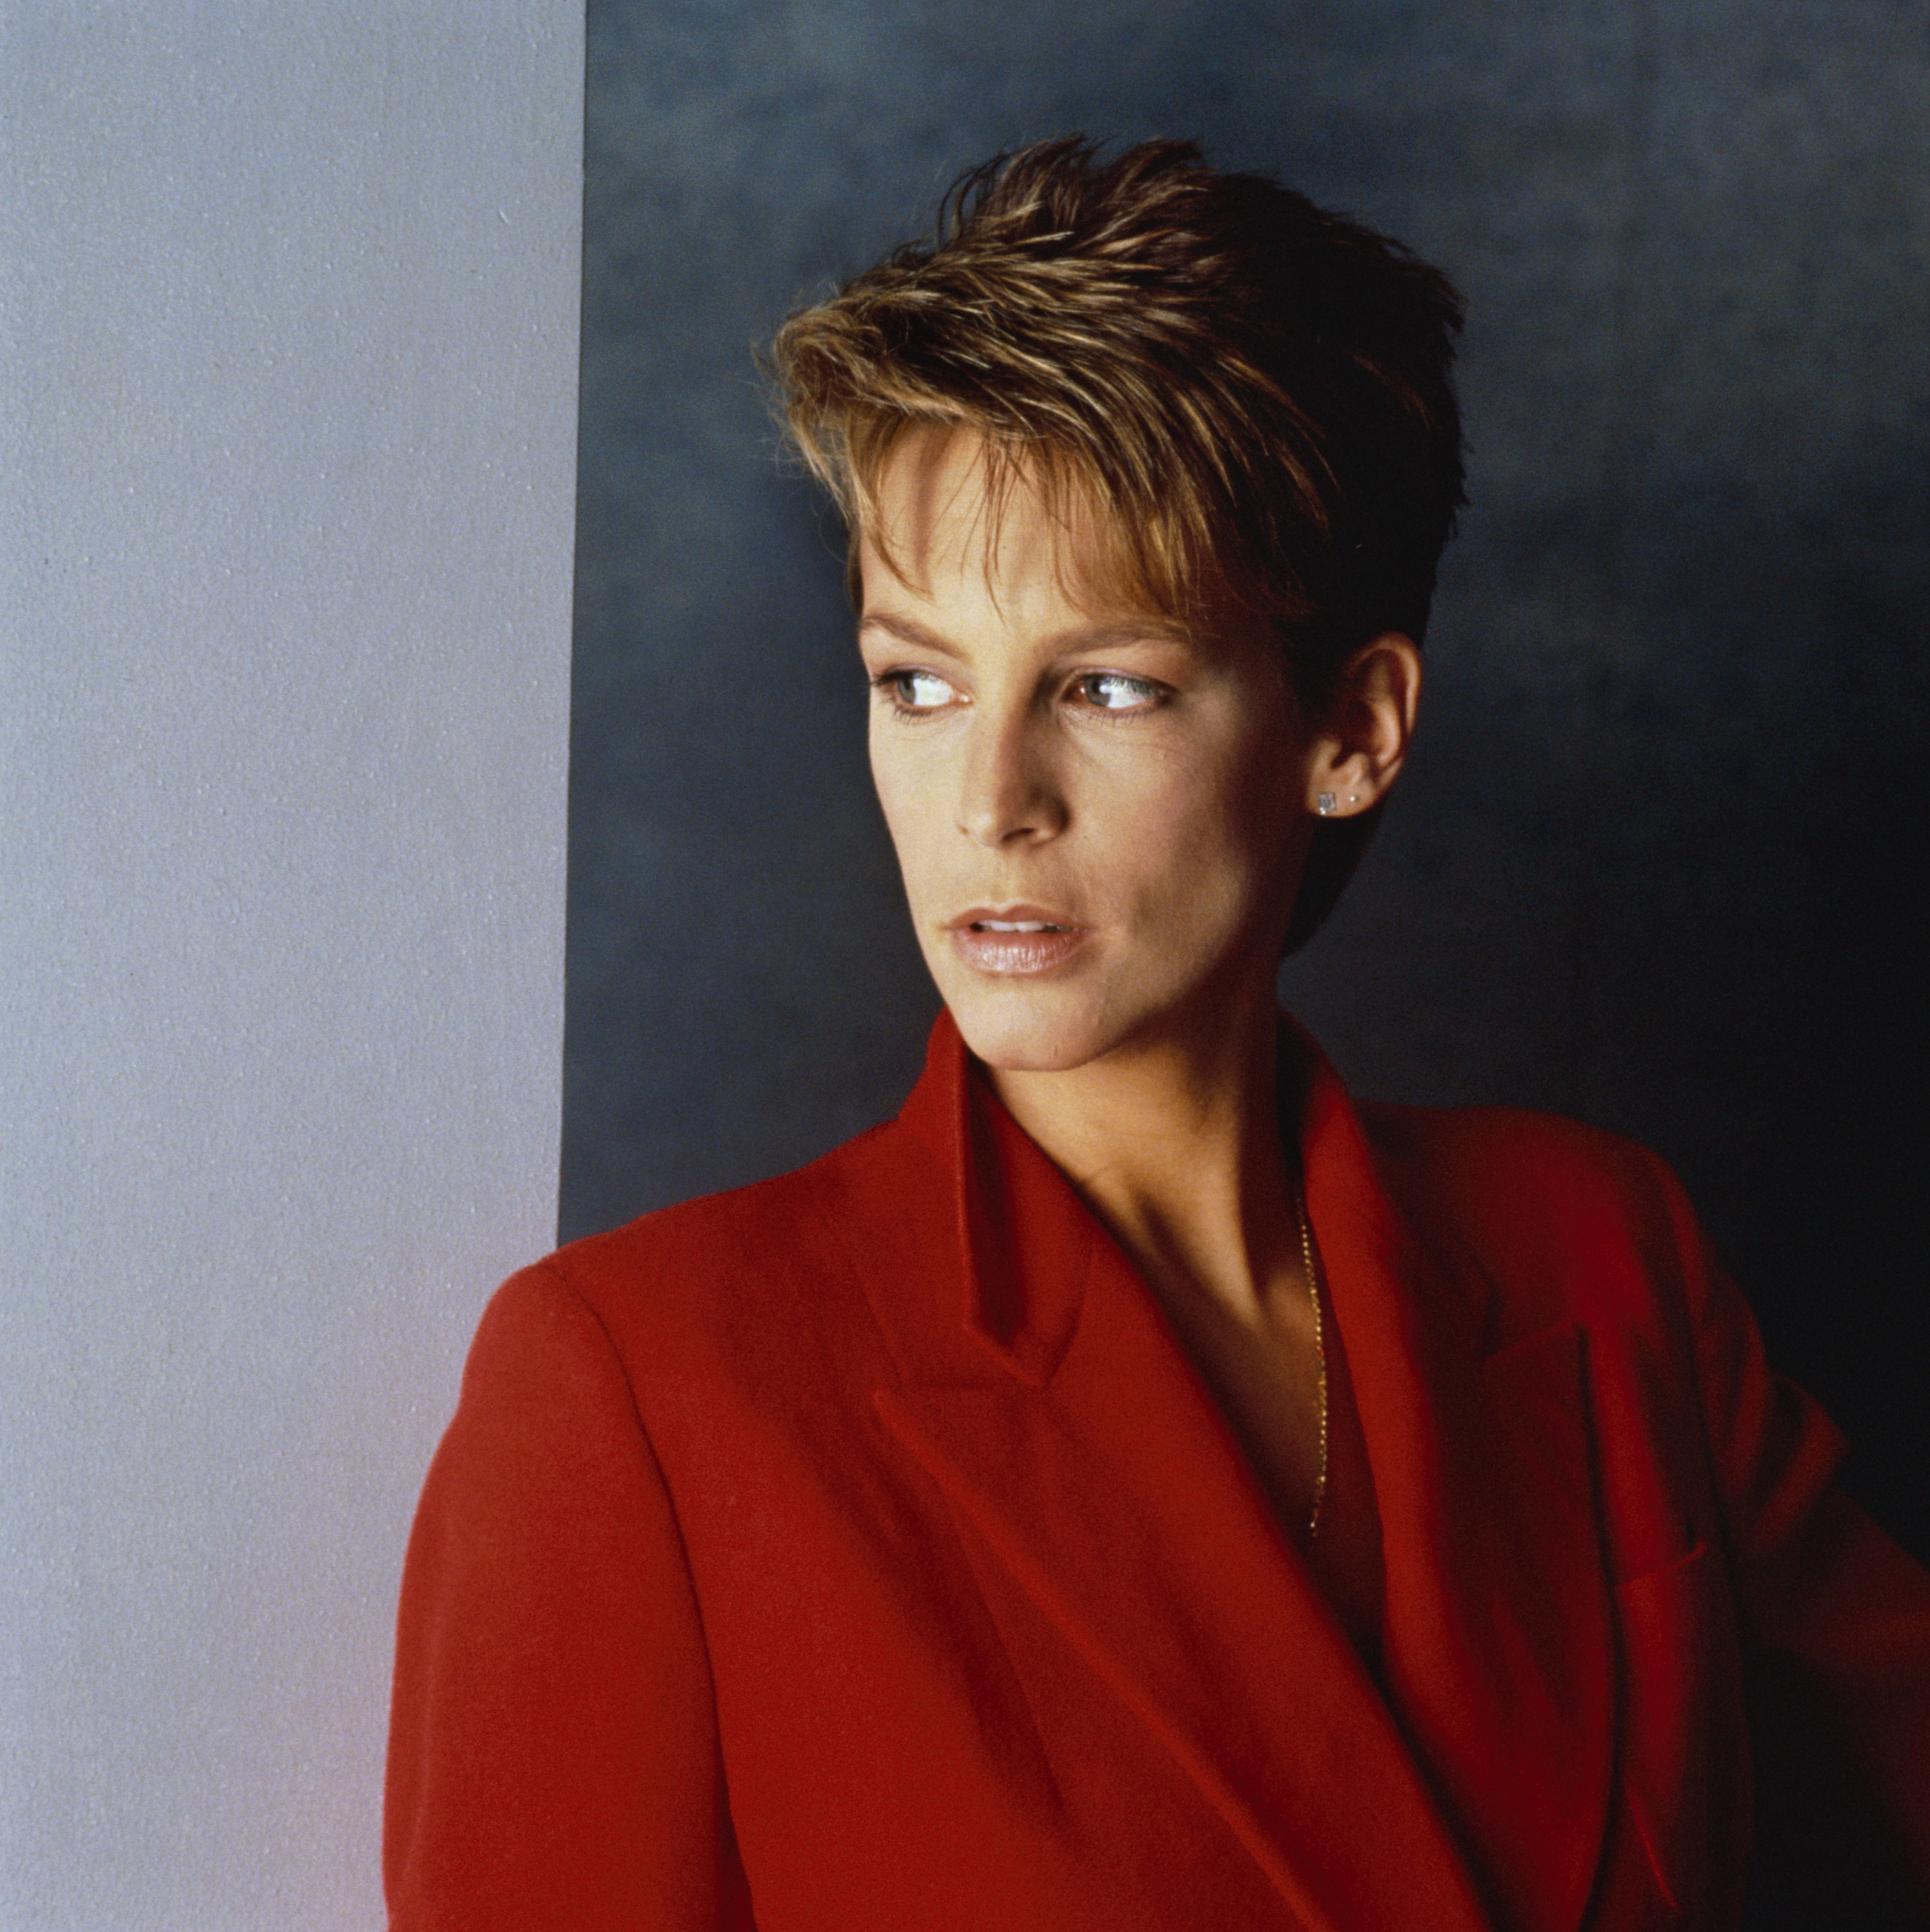 Jamie Lee Curtis photographed by Aaron Rapoport in 1985. | Source: Getty Images